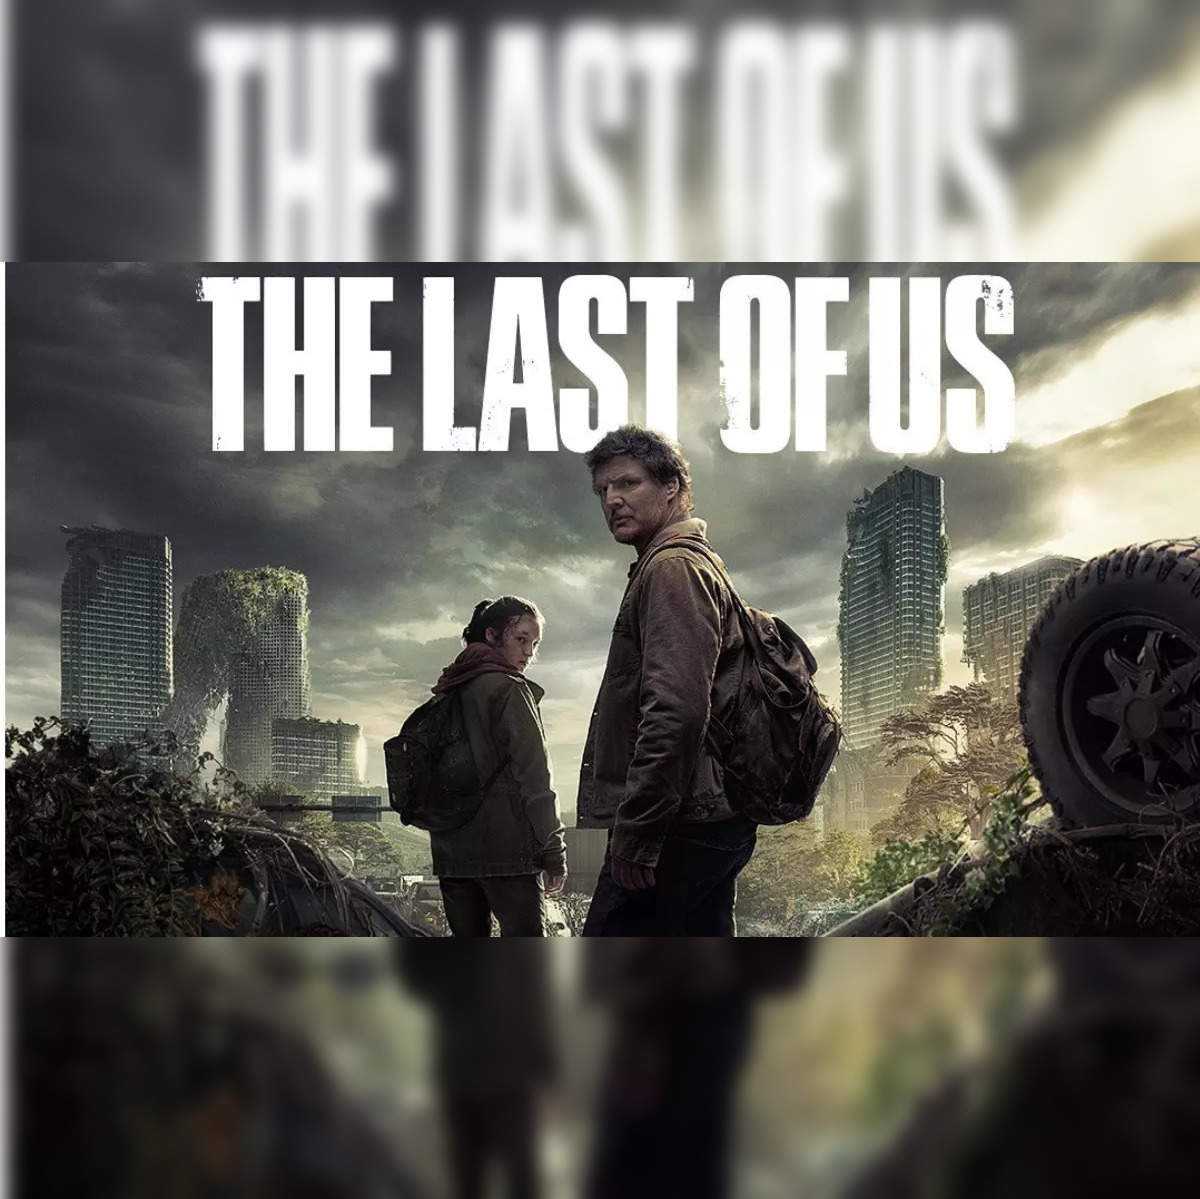 The Last of Us' Season 2: Cast, News and More